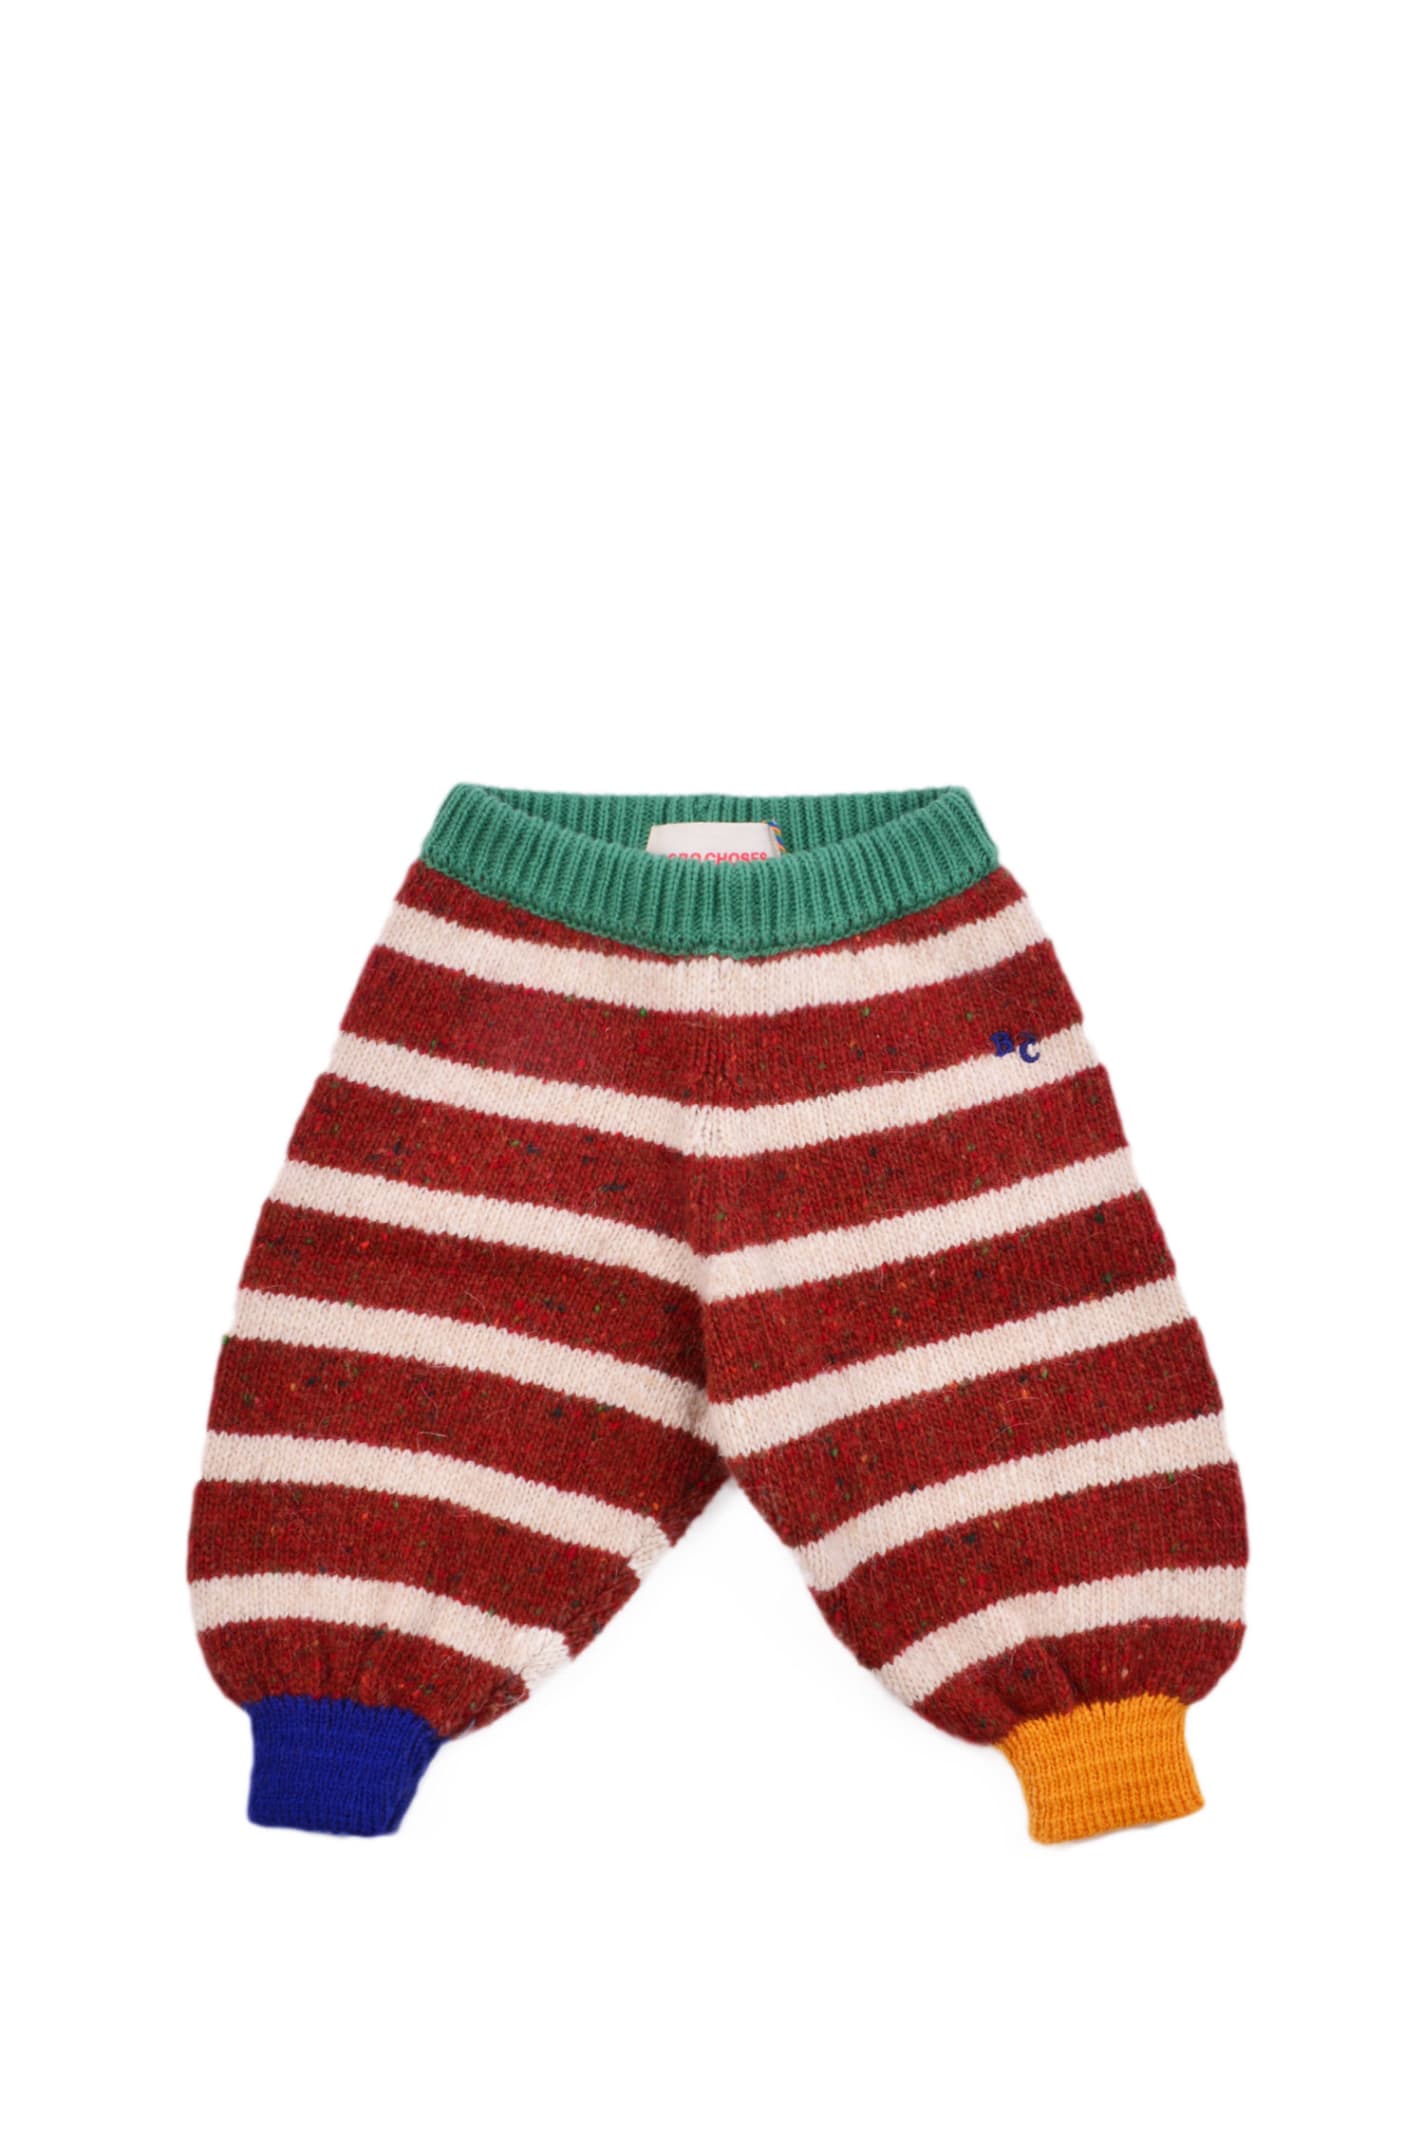 Bobo Choses Striped Knitted Trousers